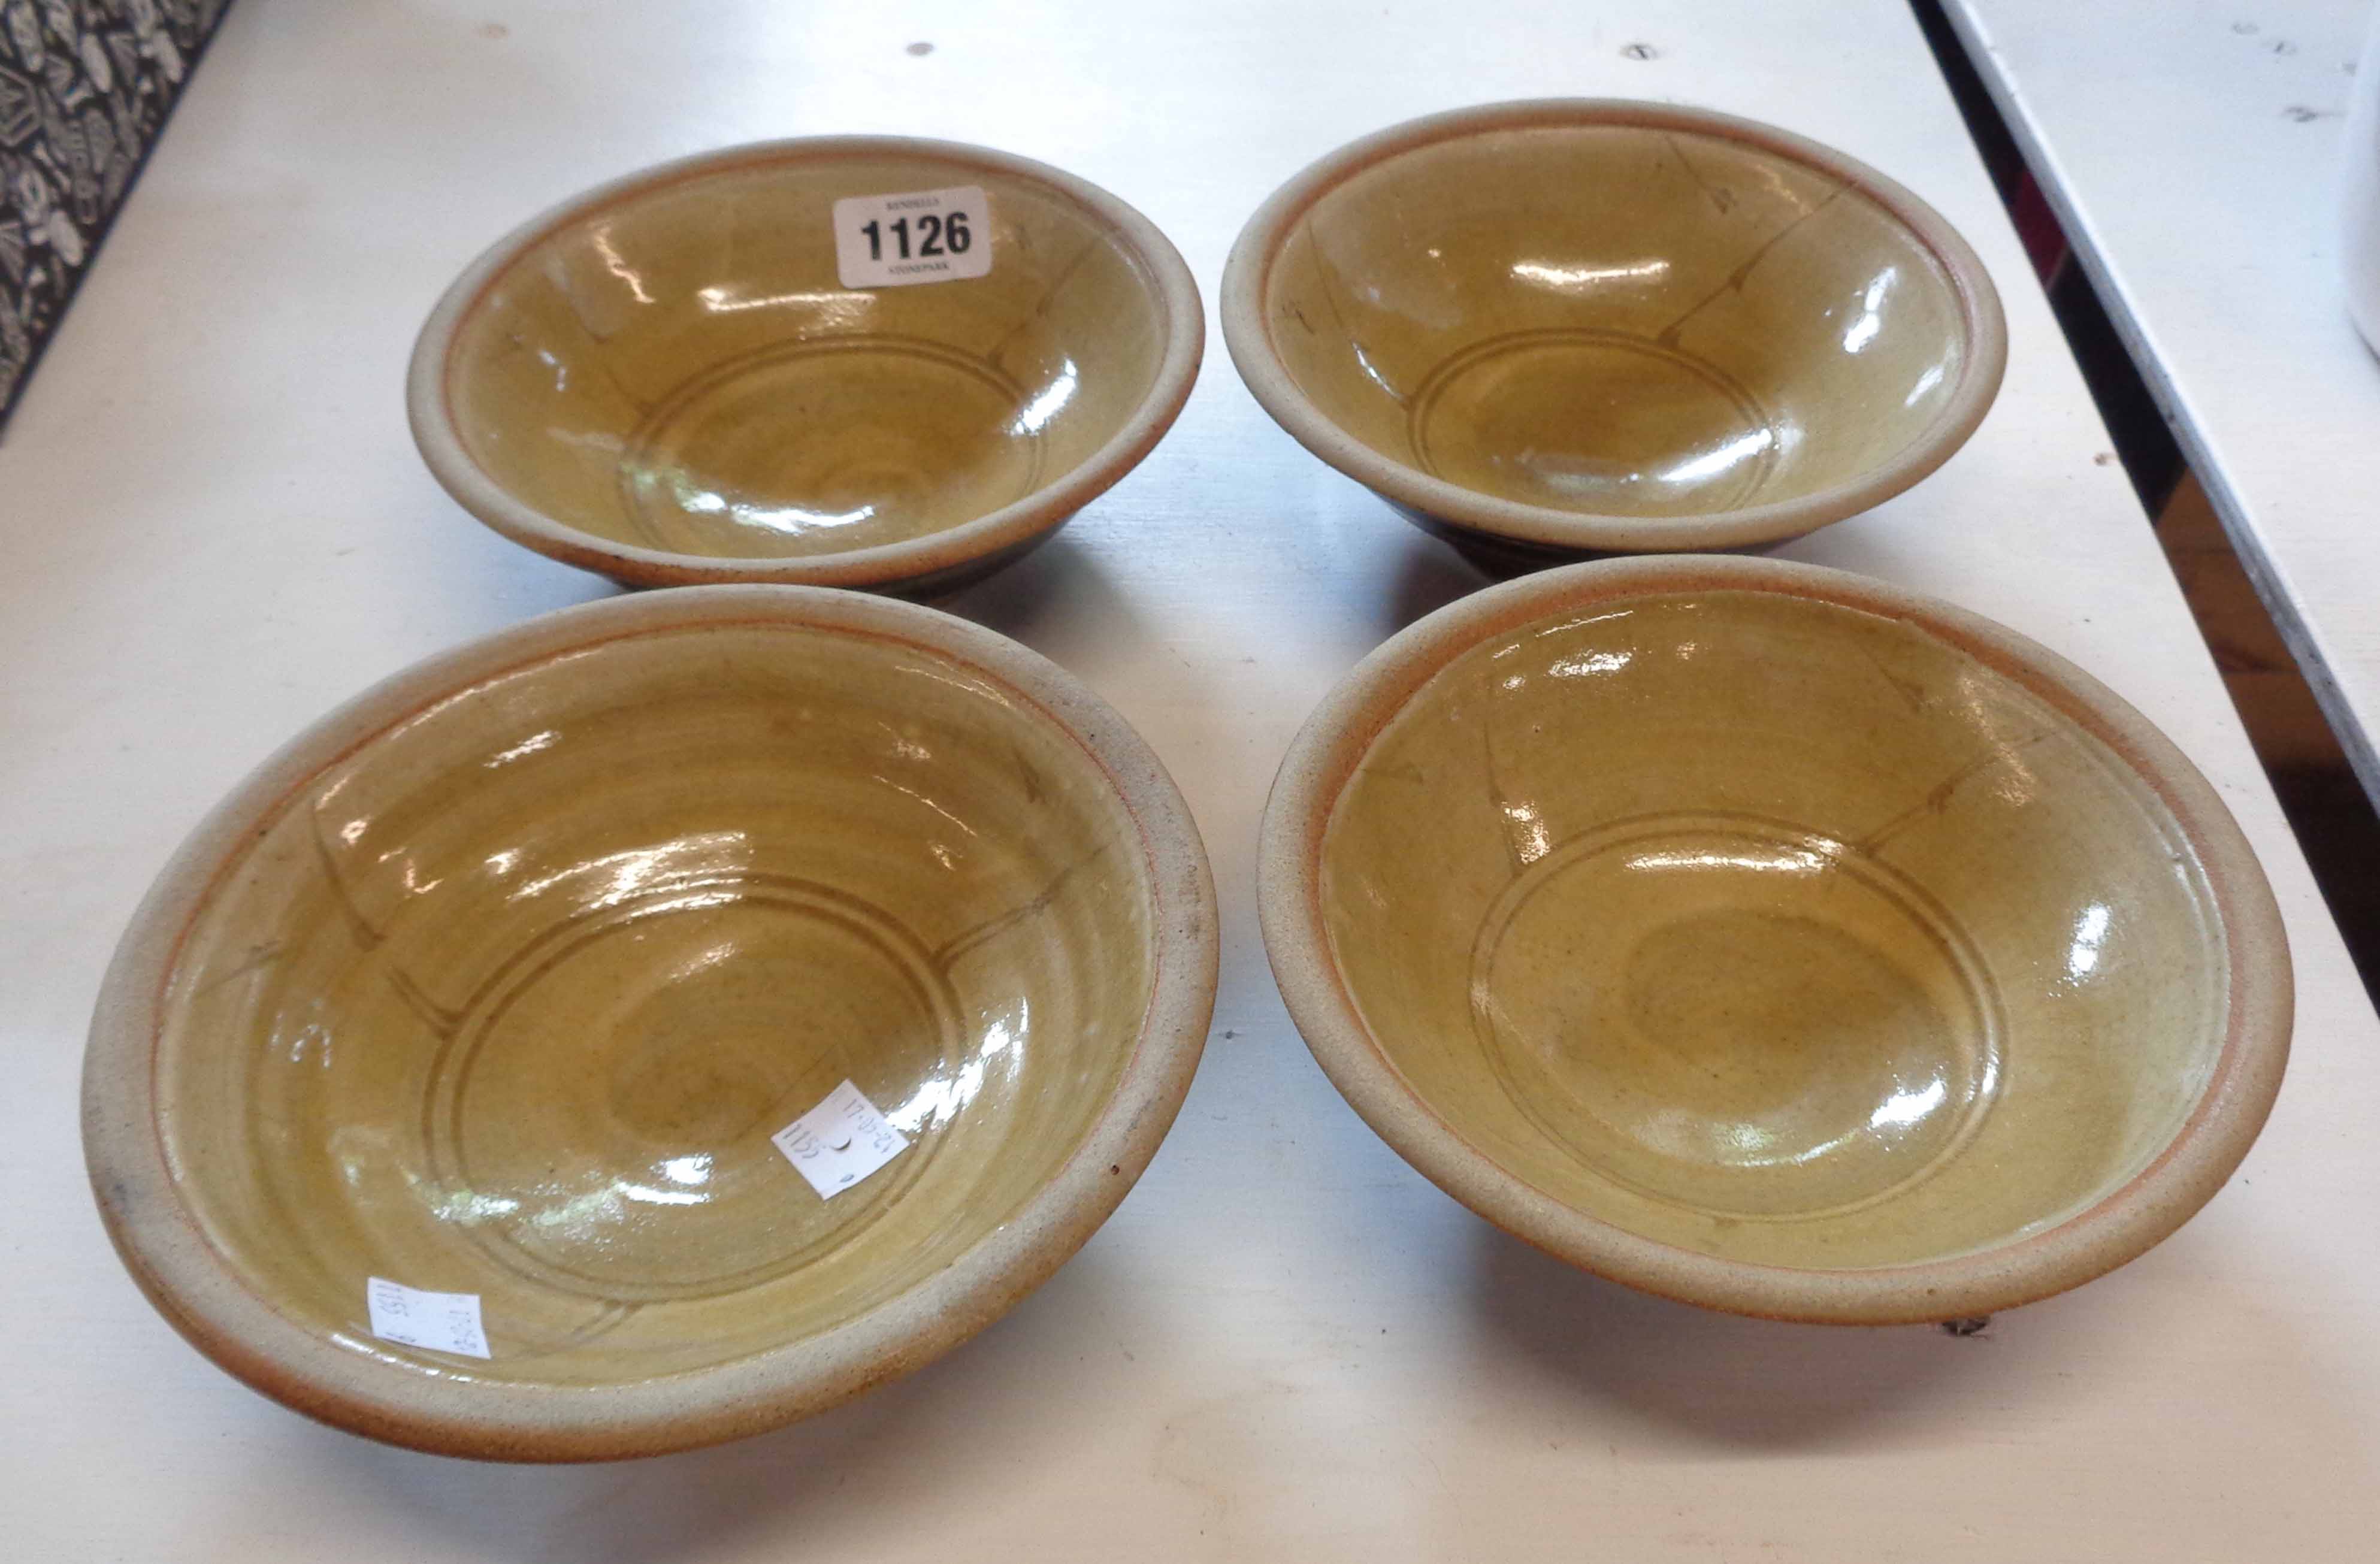 Four Studio Pottery bowls with incised decoration on a light brown interior glaze and dark brown